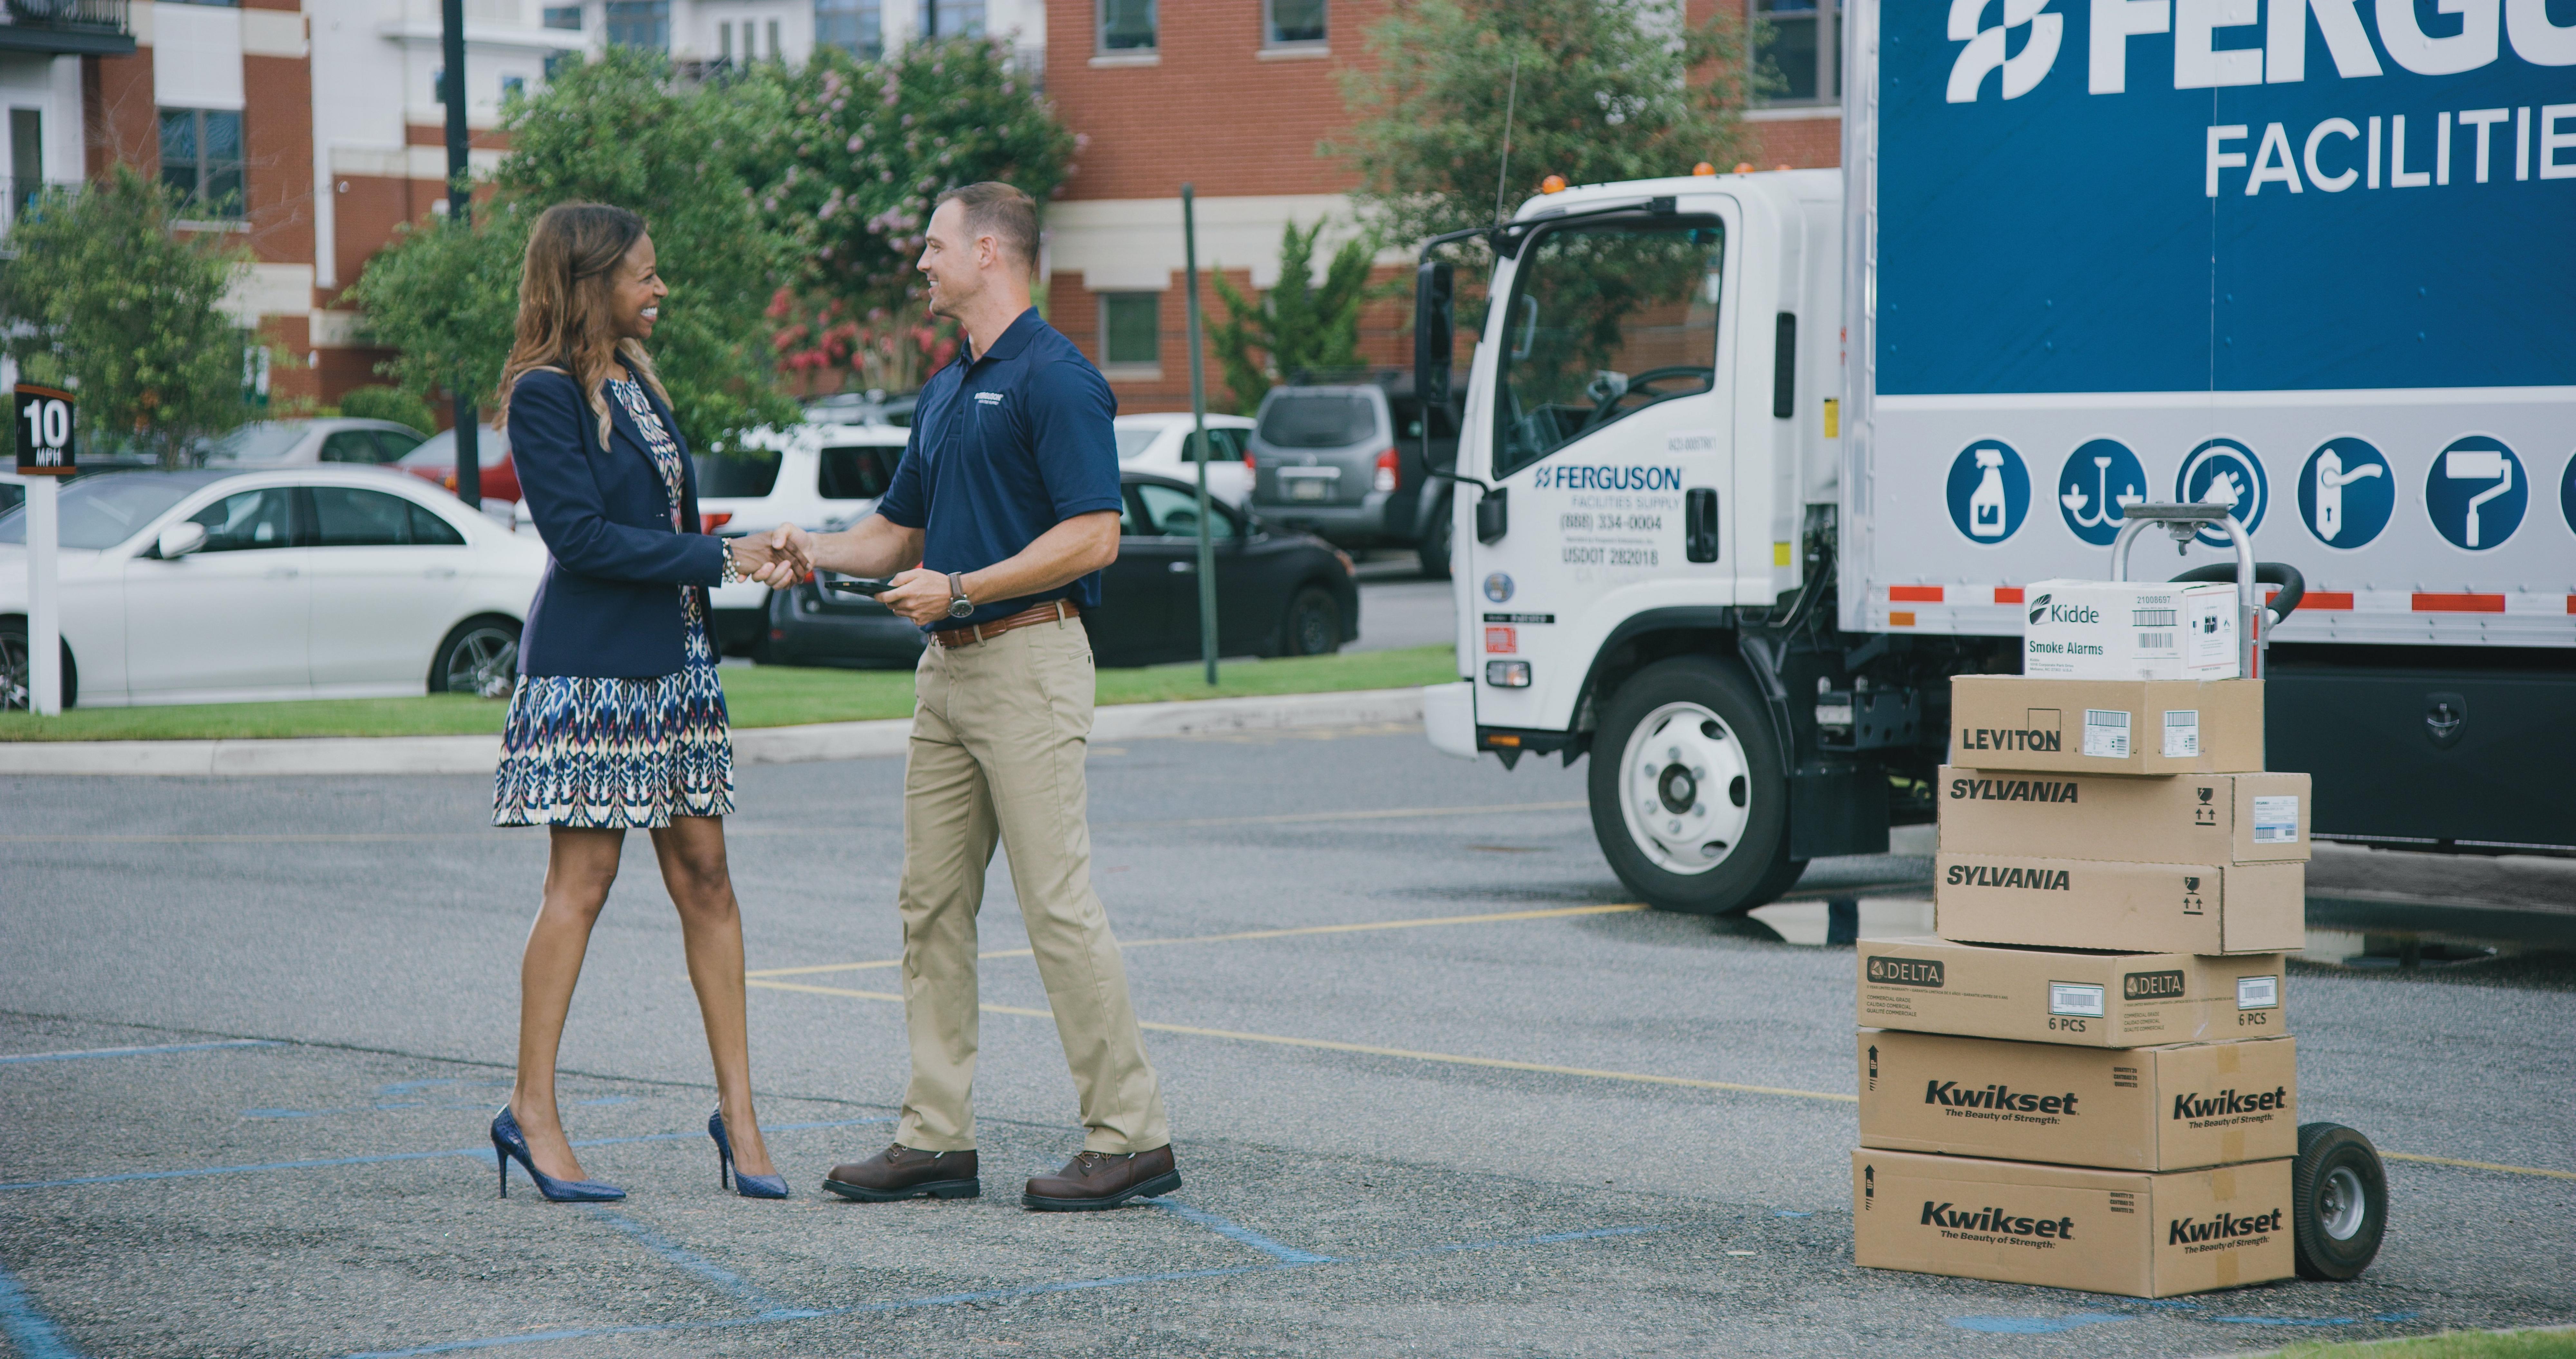 A Ferguson associate shakes hands with a property manager in a parking lot. Boxes of supplies and a Ferguson delivery truck are in the background.